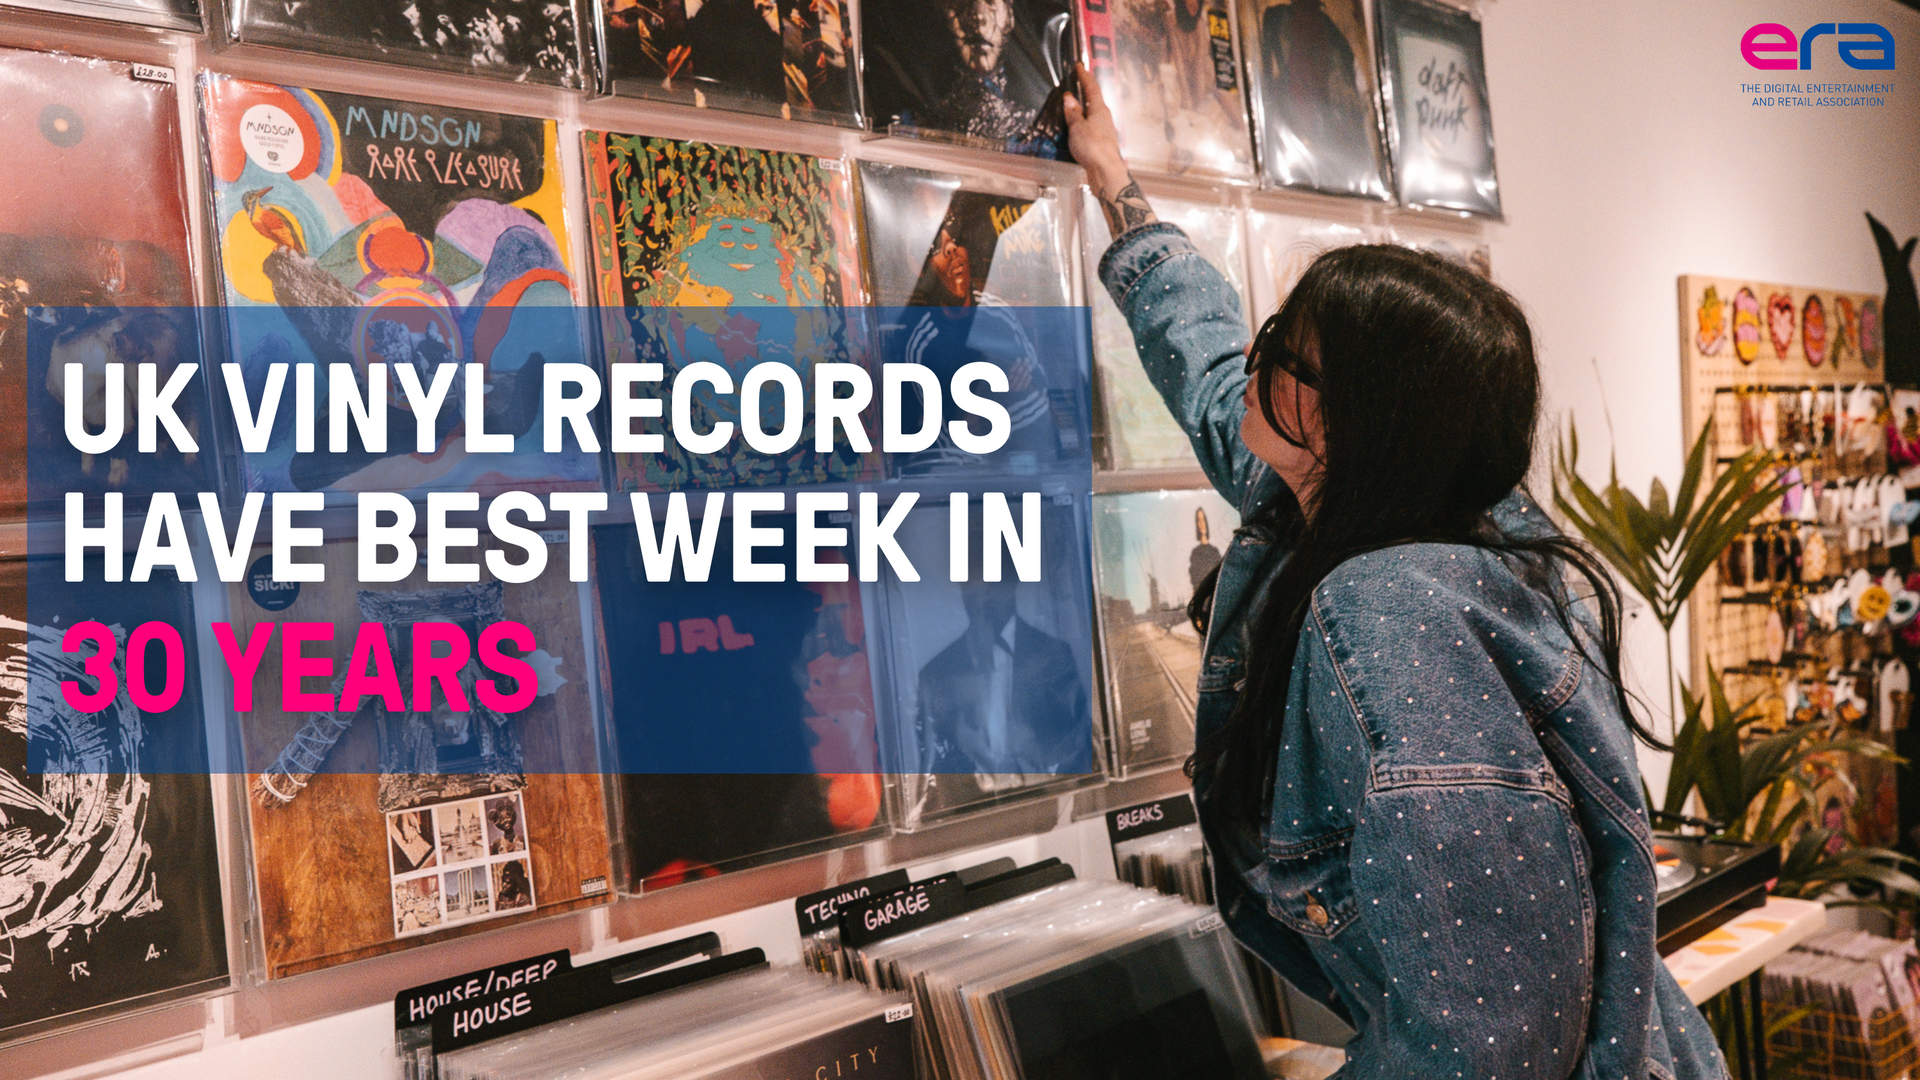 RECORD STORE DAY X TAYLOR SWIFT – UK VINYL SALES HAVE THEIR BEST WEEK IN 30 YEARS